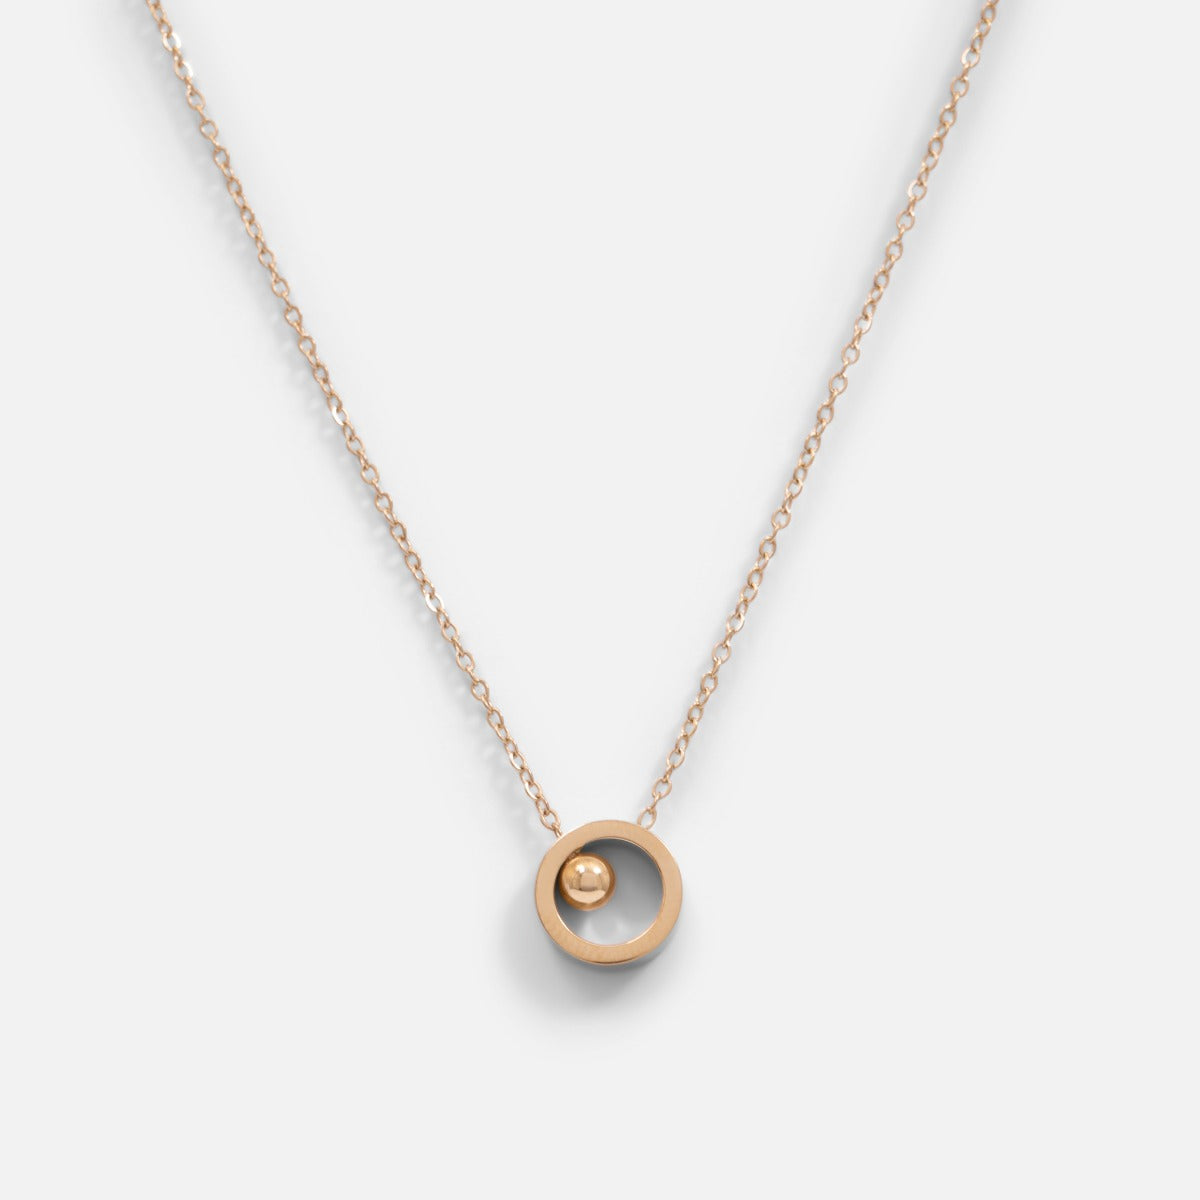 Golden stainless steel necklace with small round charm and bead